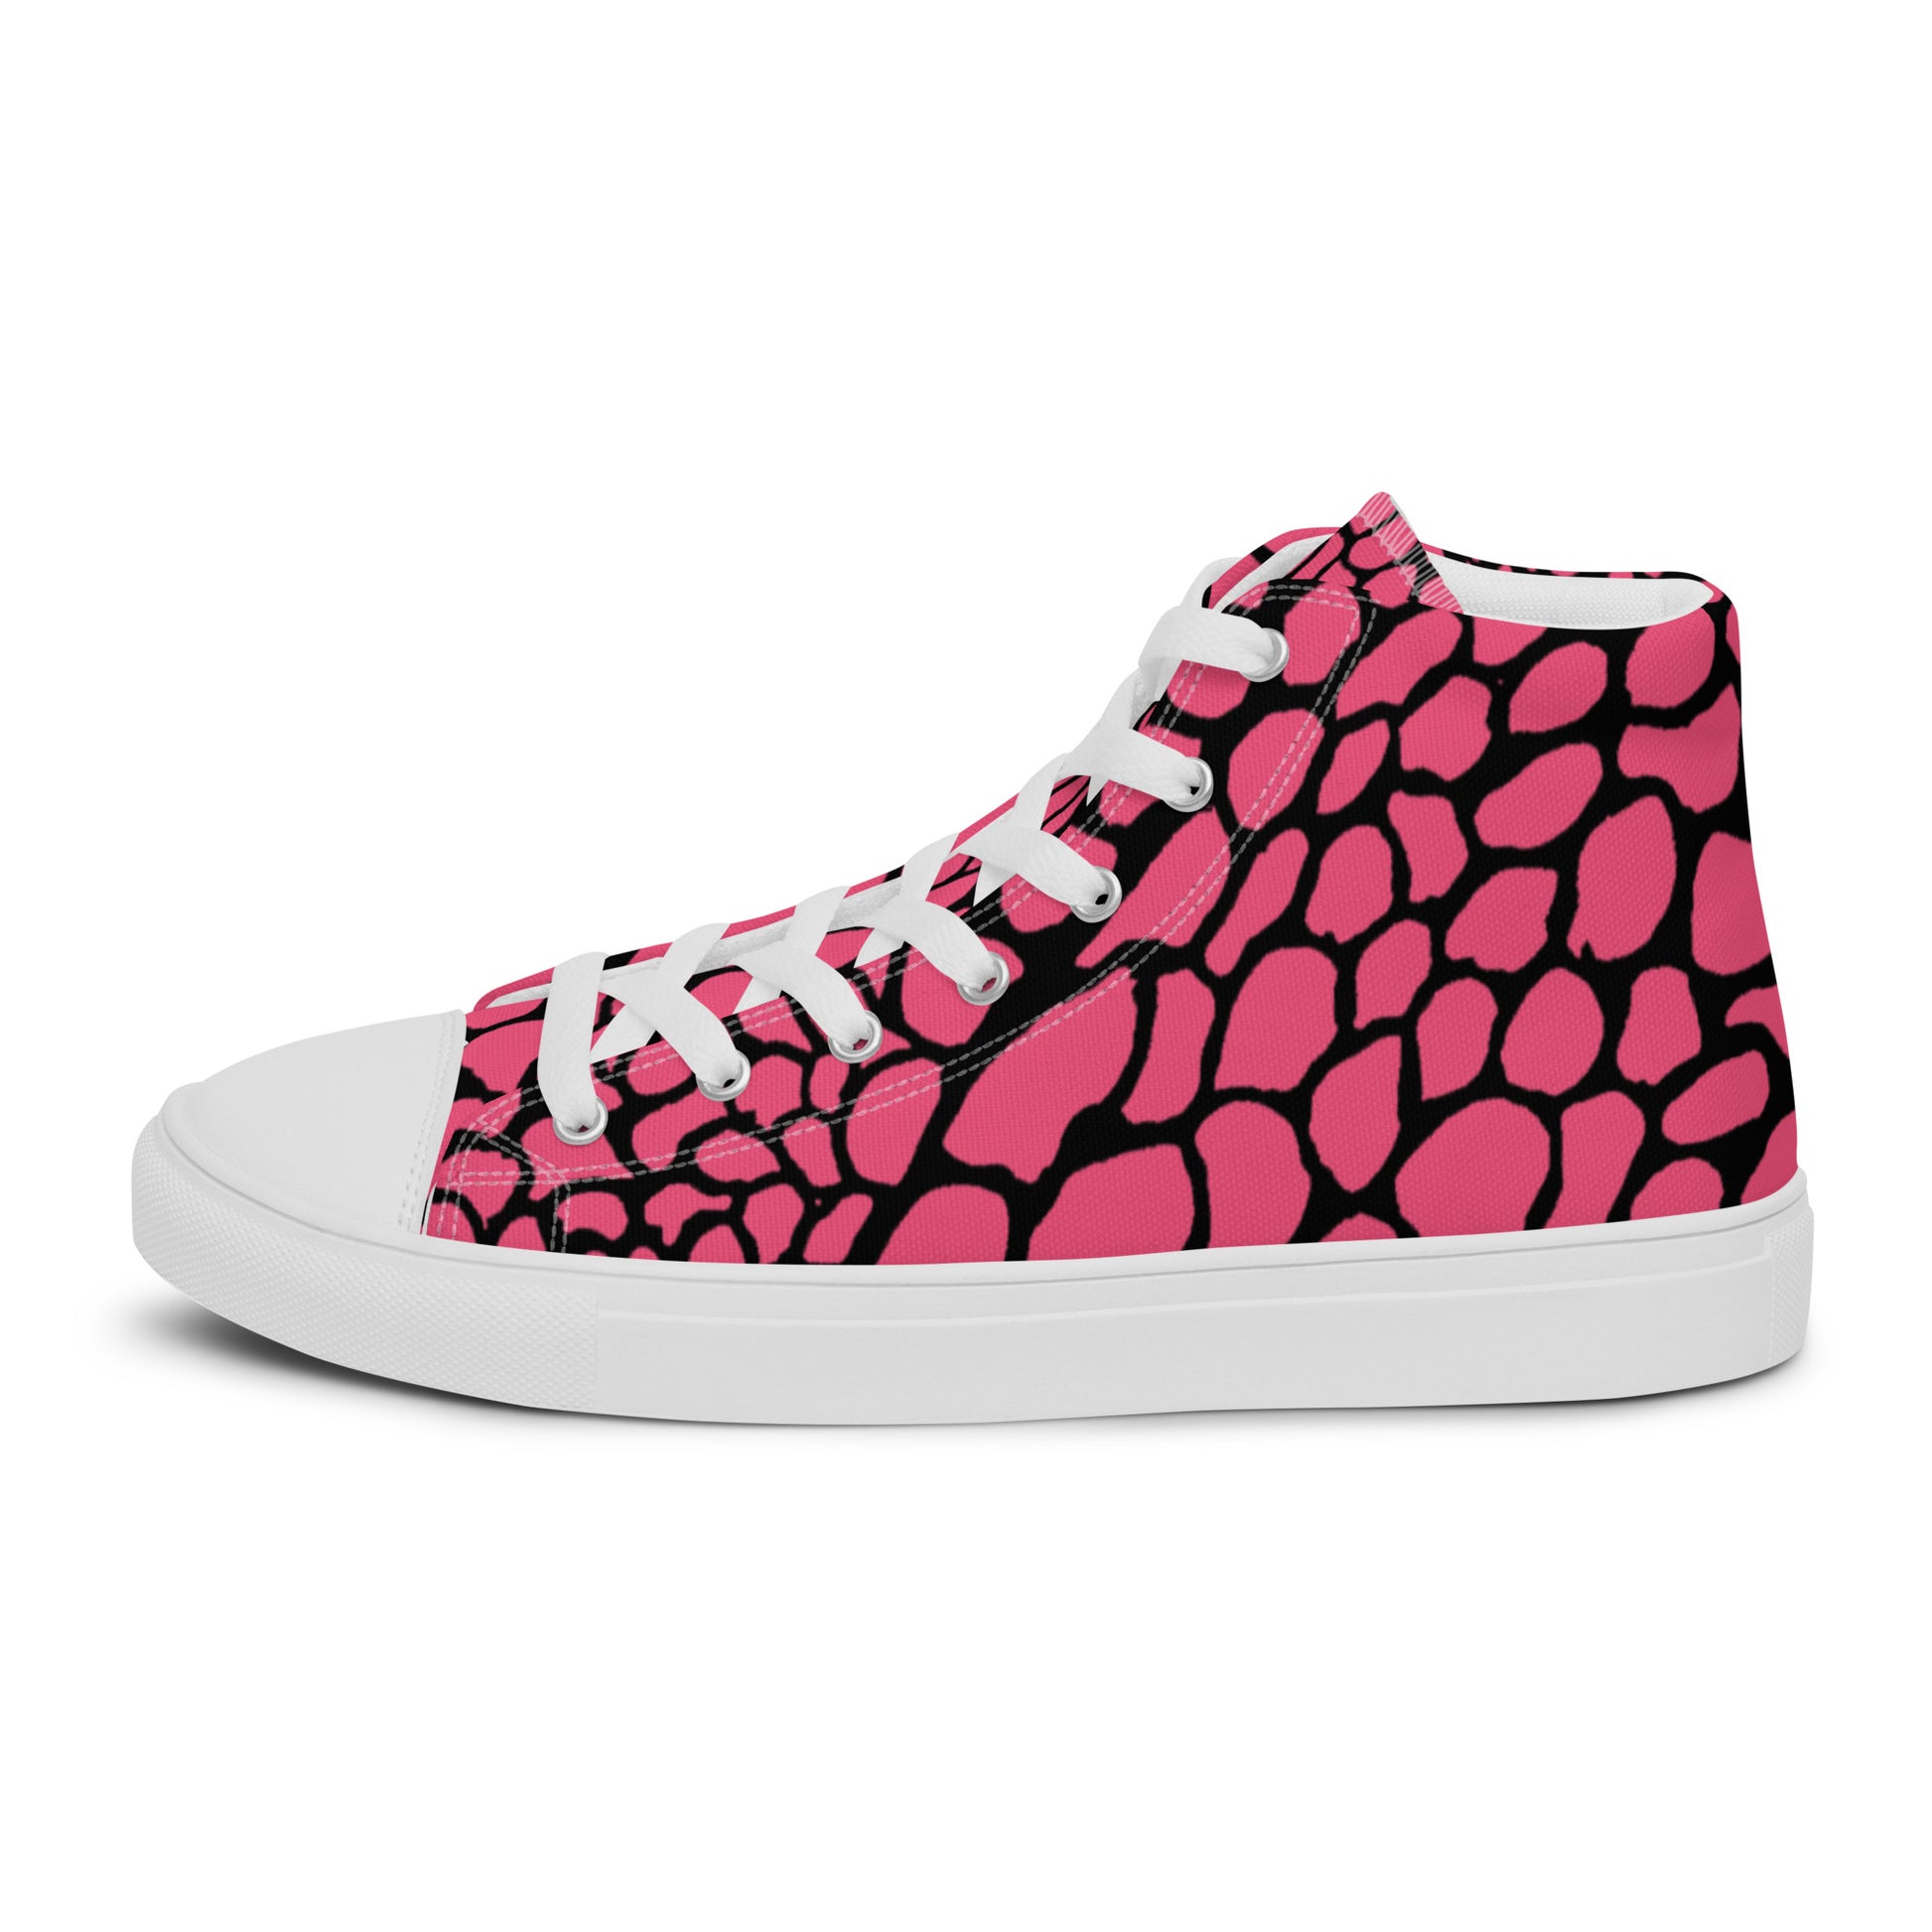 Organic Brink Pink Print Men’s High Top Canvas Shoes | Casual Print Shoes | Stylish Festival Sneakers | Abstract Shoes | Lace Up Sneakers | - Comfortable Culture - Shoes - Comfortable Culture